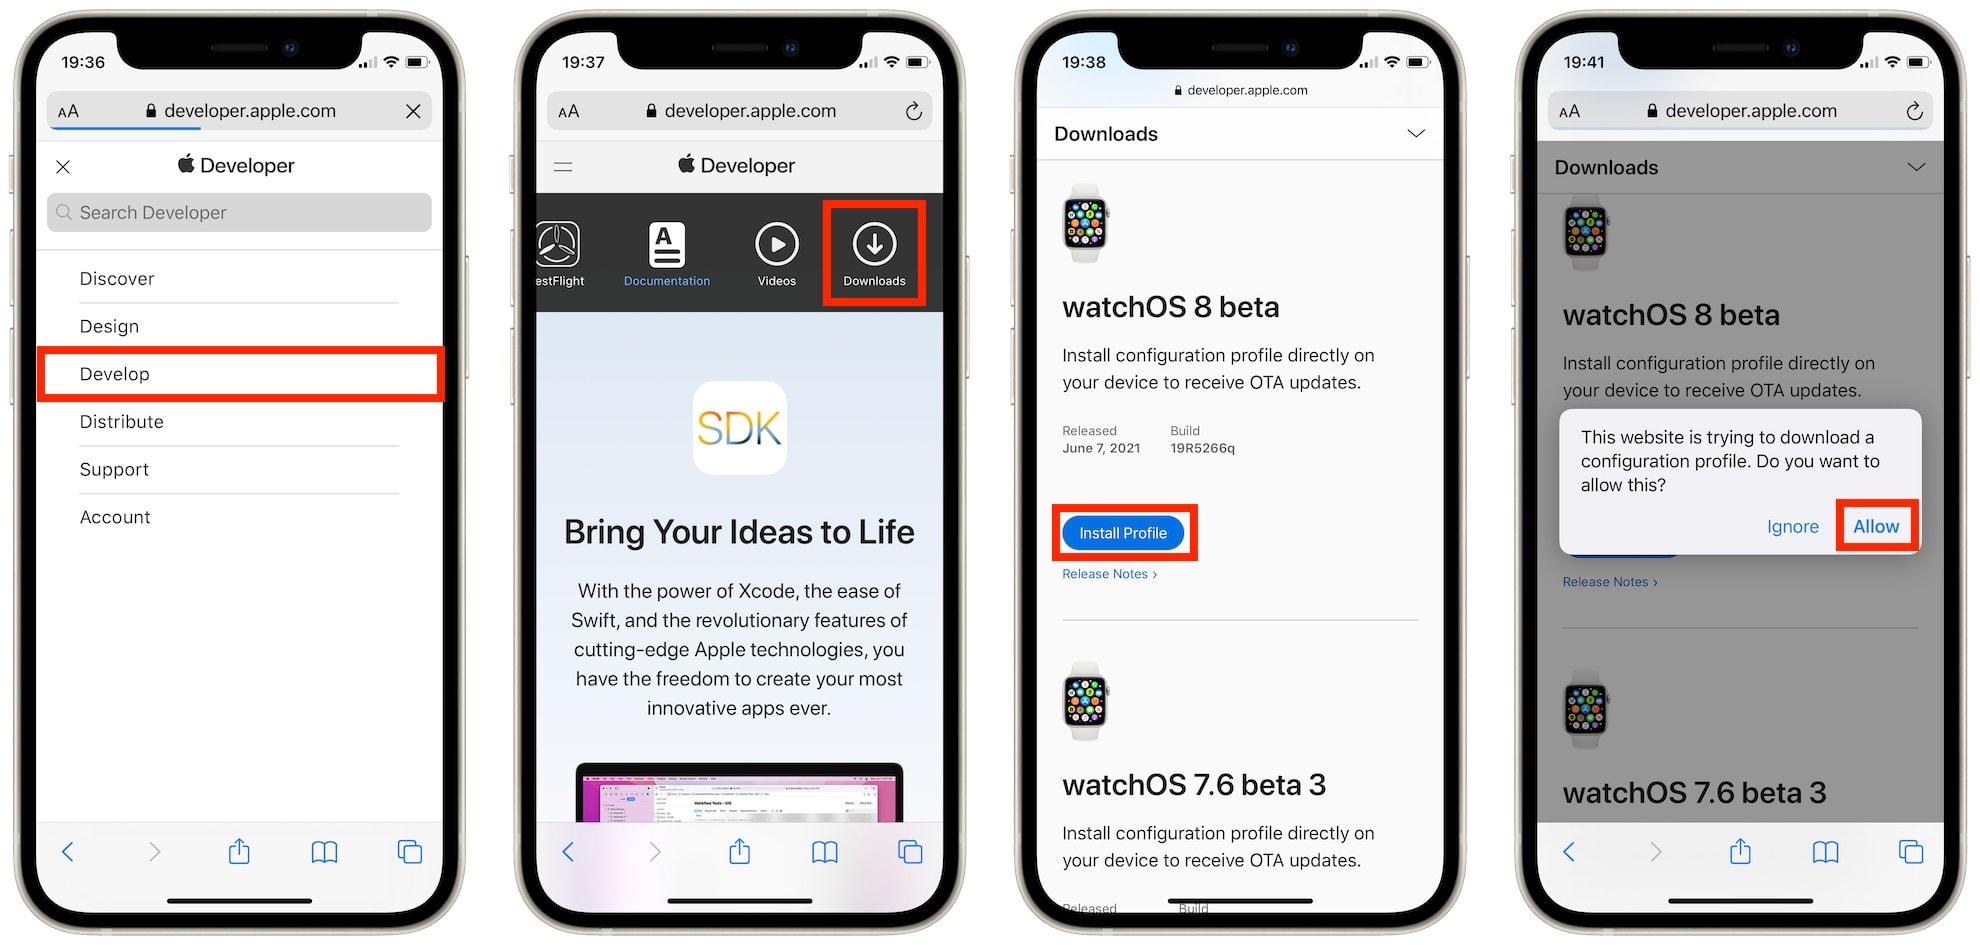 How to install the watchOS 8 beta